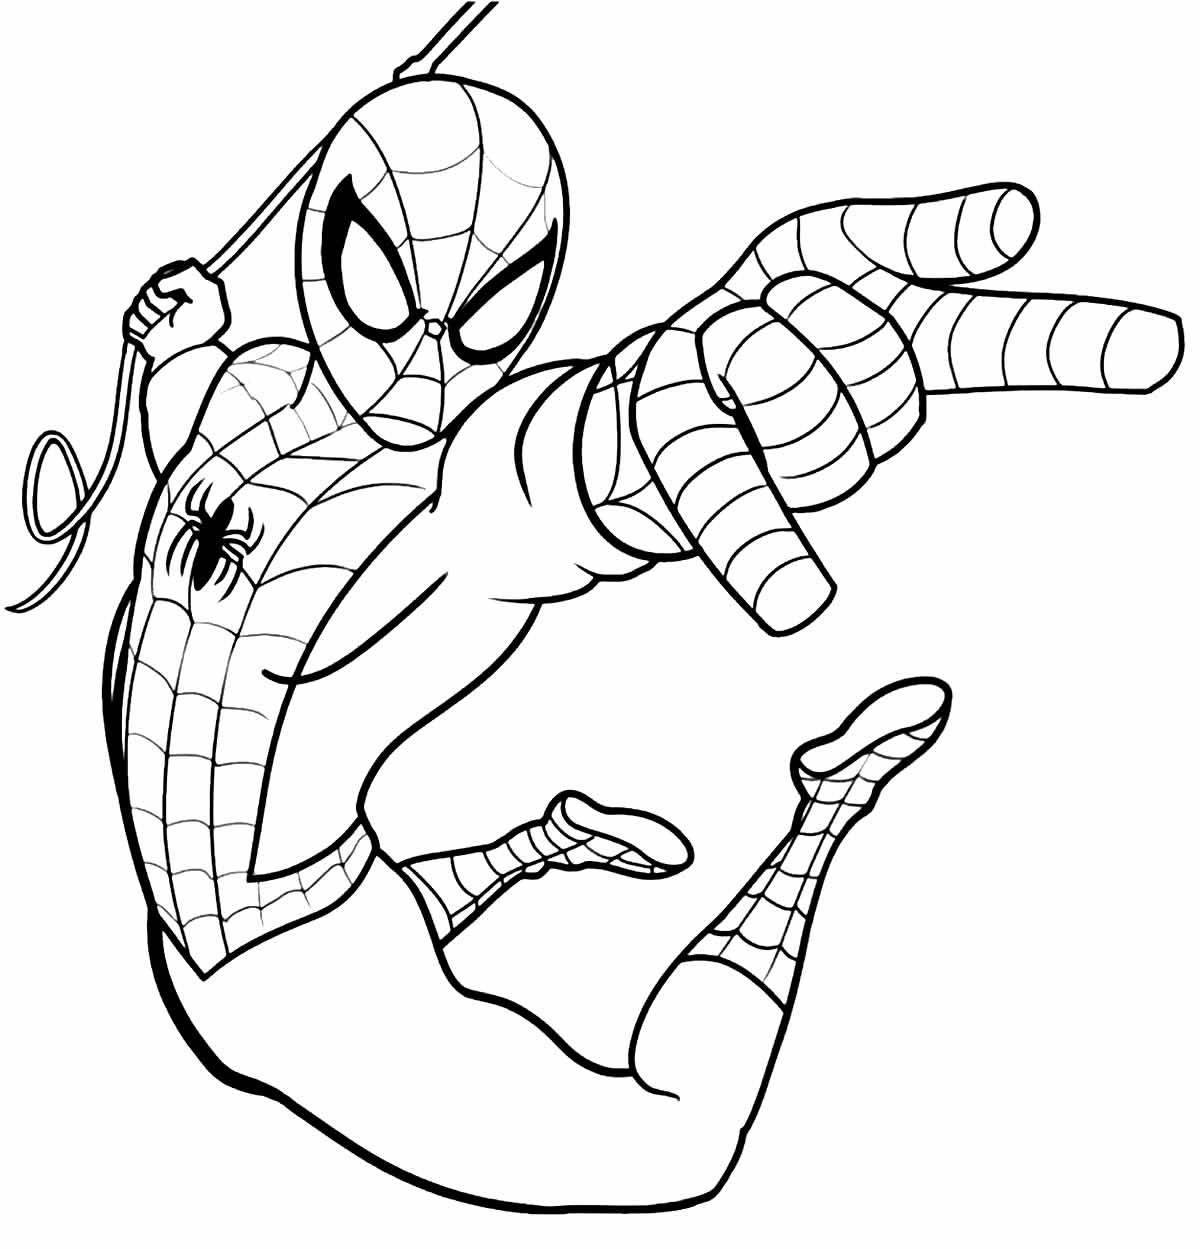 Outstanding spiderman coloring page for kids